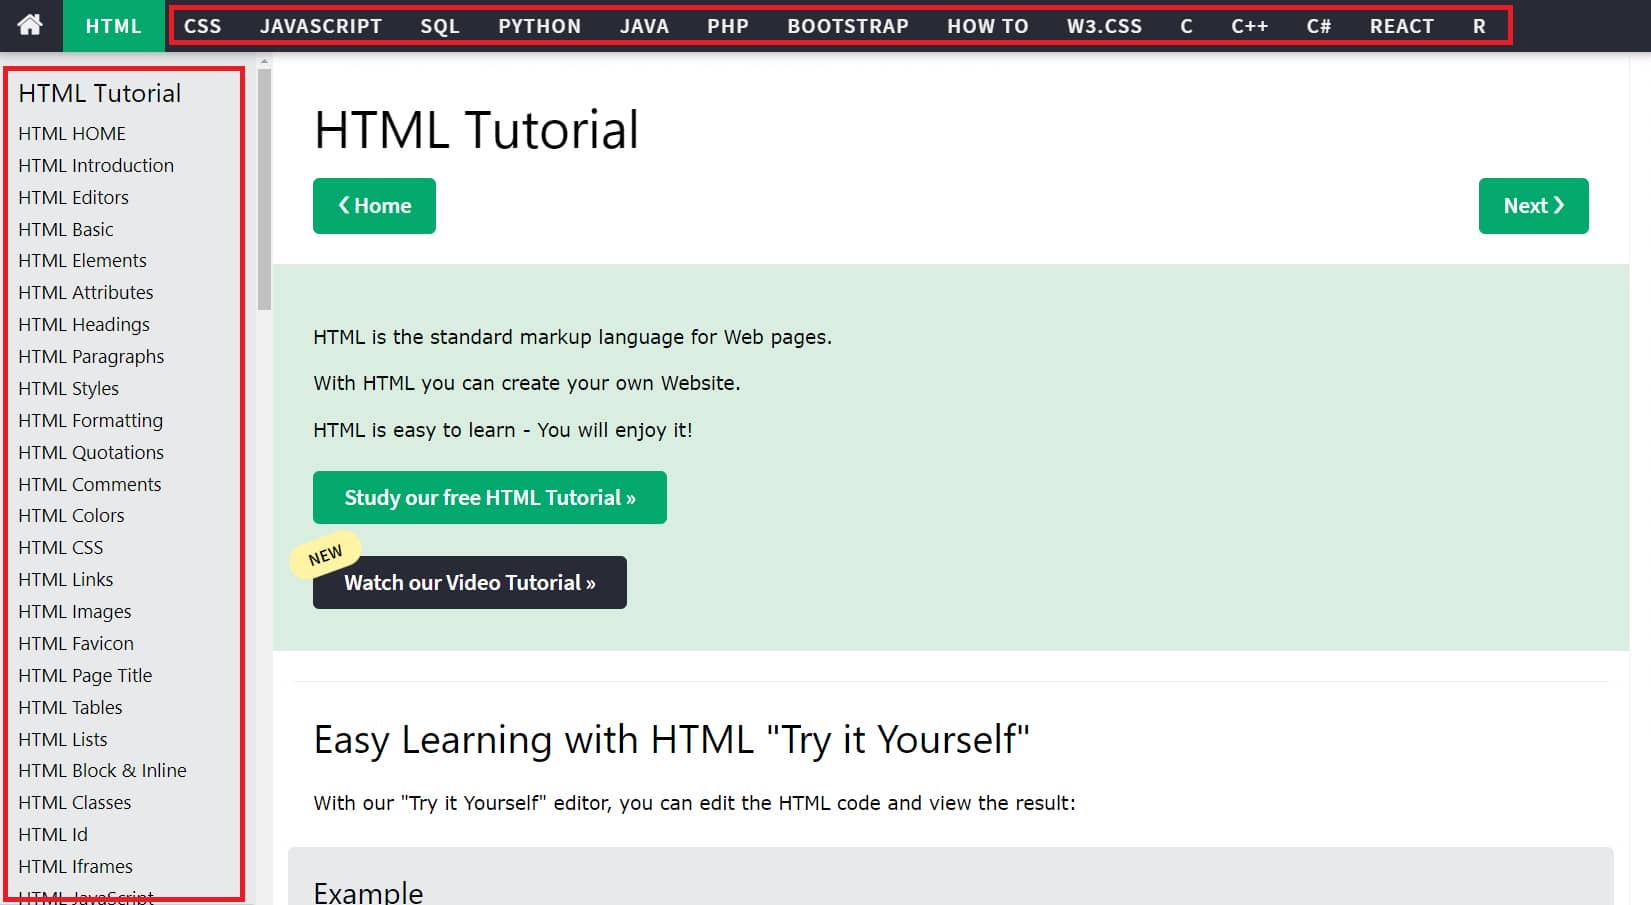 W3Schools to Learn HTML, CSS, and More